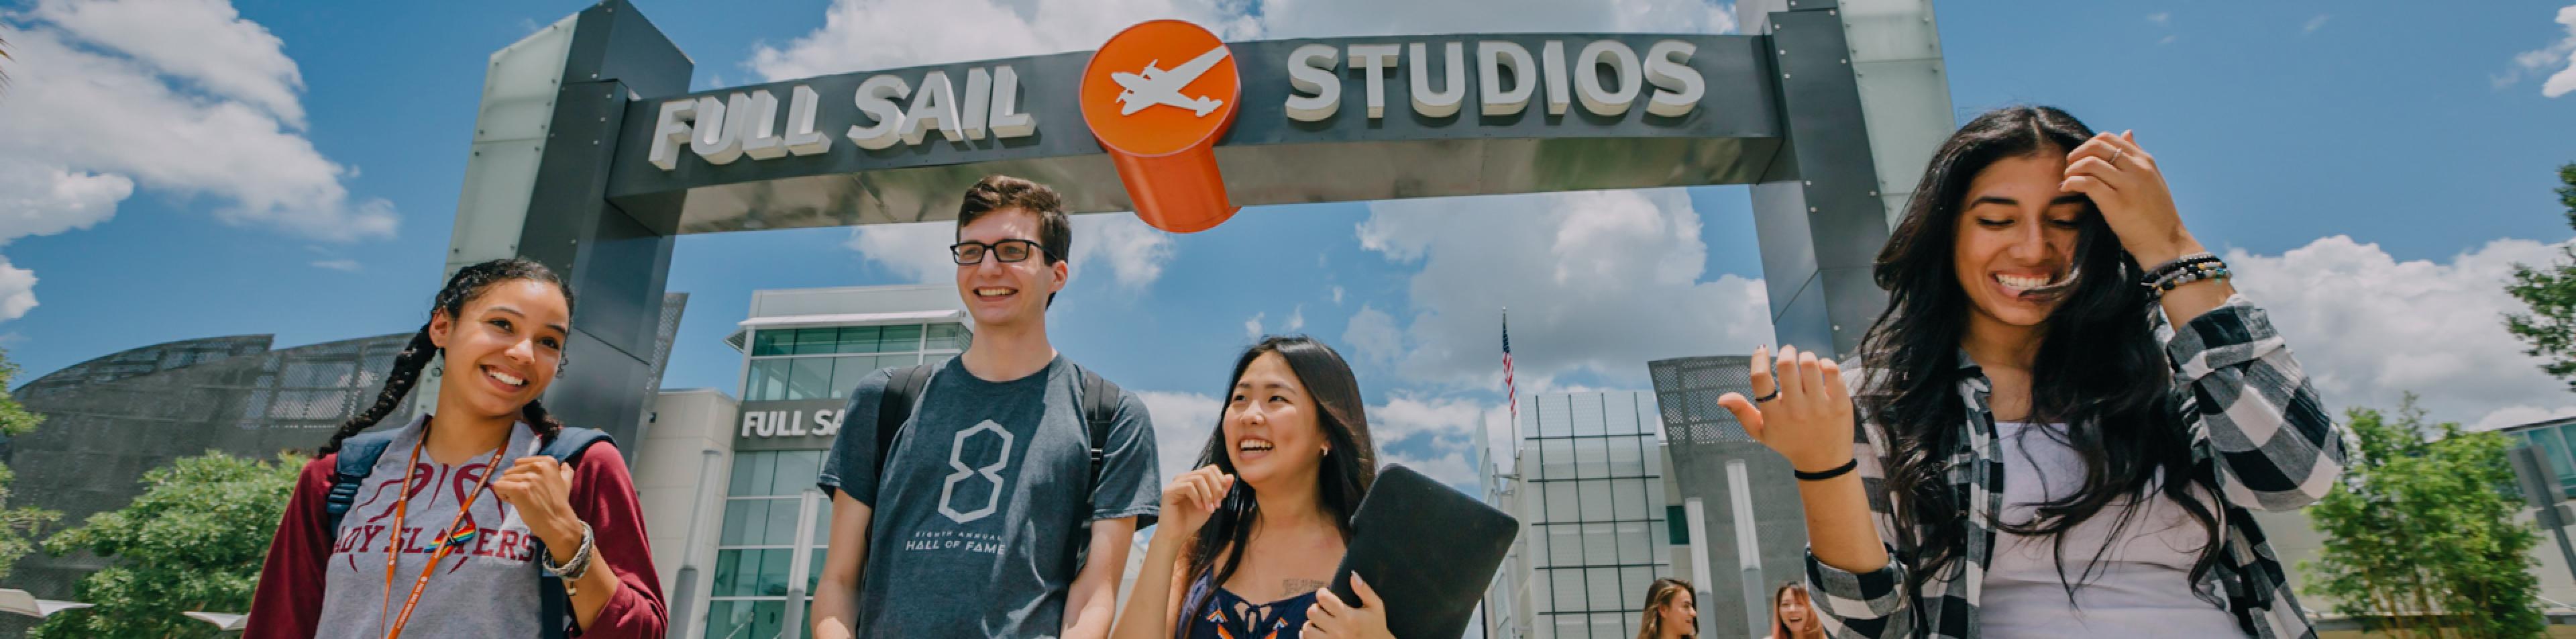 On a bright, sunny campus beneath the Full Sail Studios archway, a group of students with backpacks laugh and walk together.